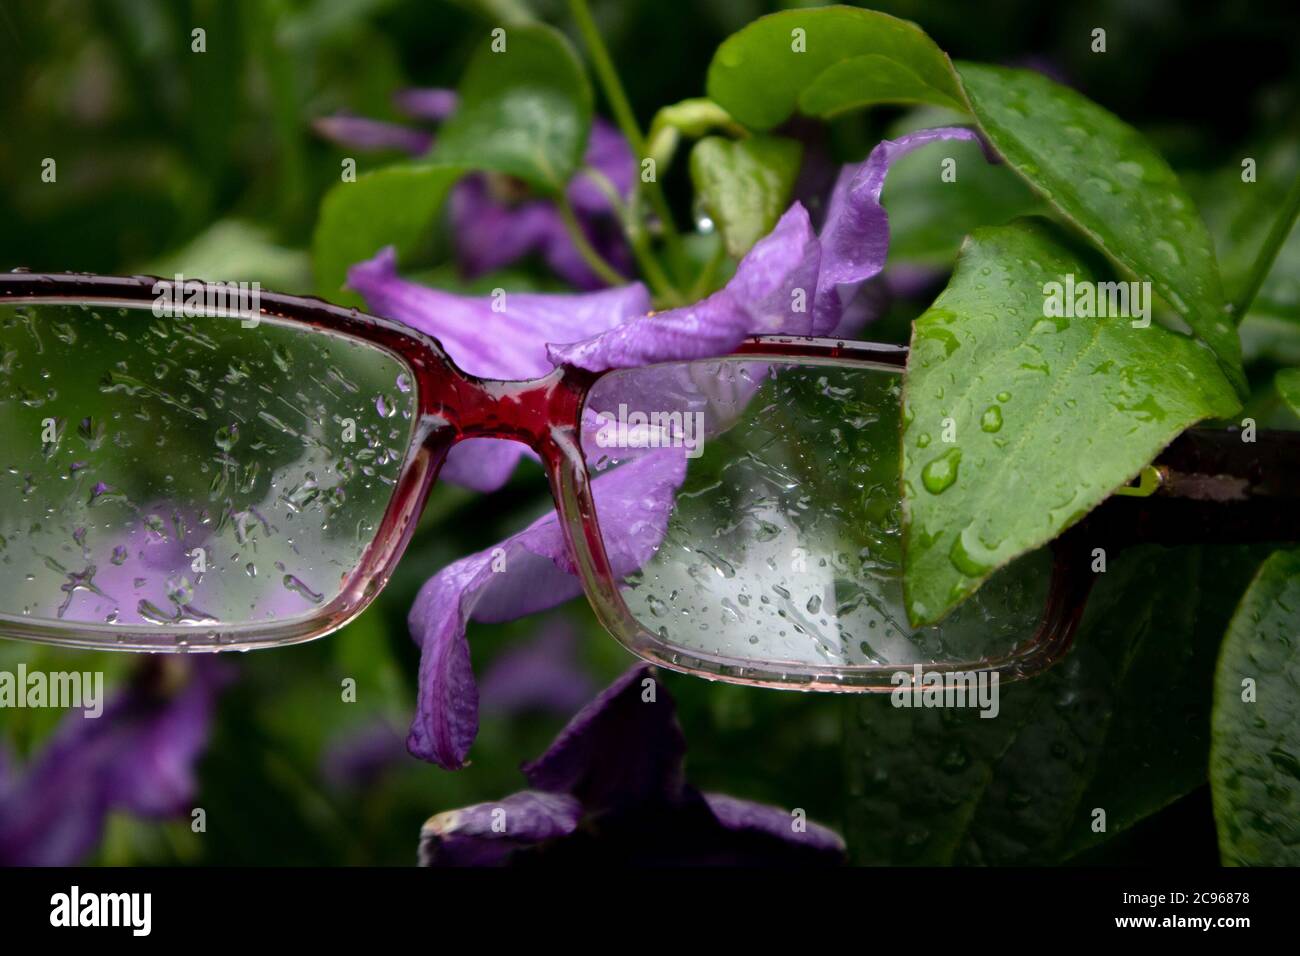 Eye glasses with rain drops hanging on the clematis bush with wet foliage and violet flower Stock Photo